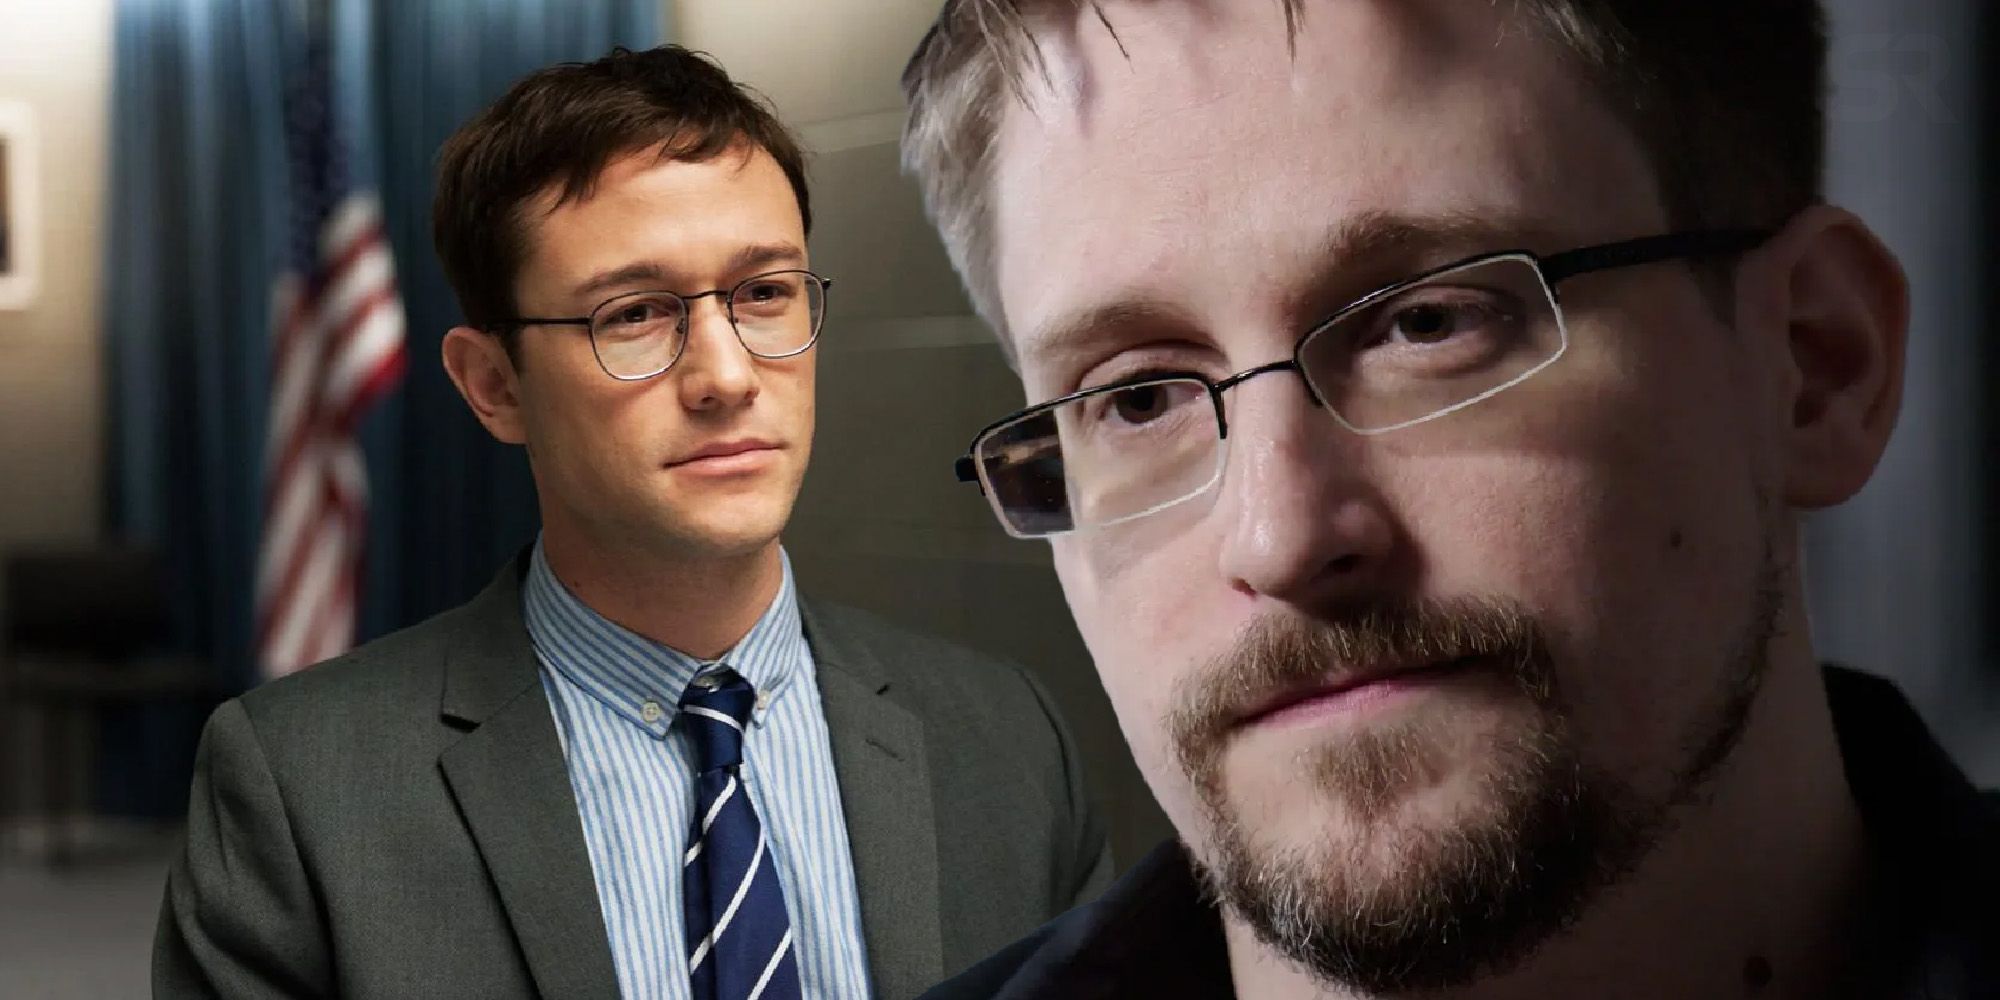 Snowden True Story The Movies Biggest Changes To The Real NSA Leaks